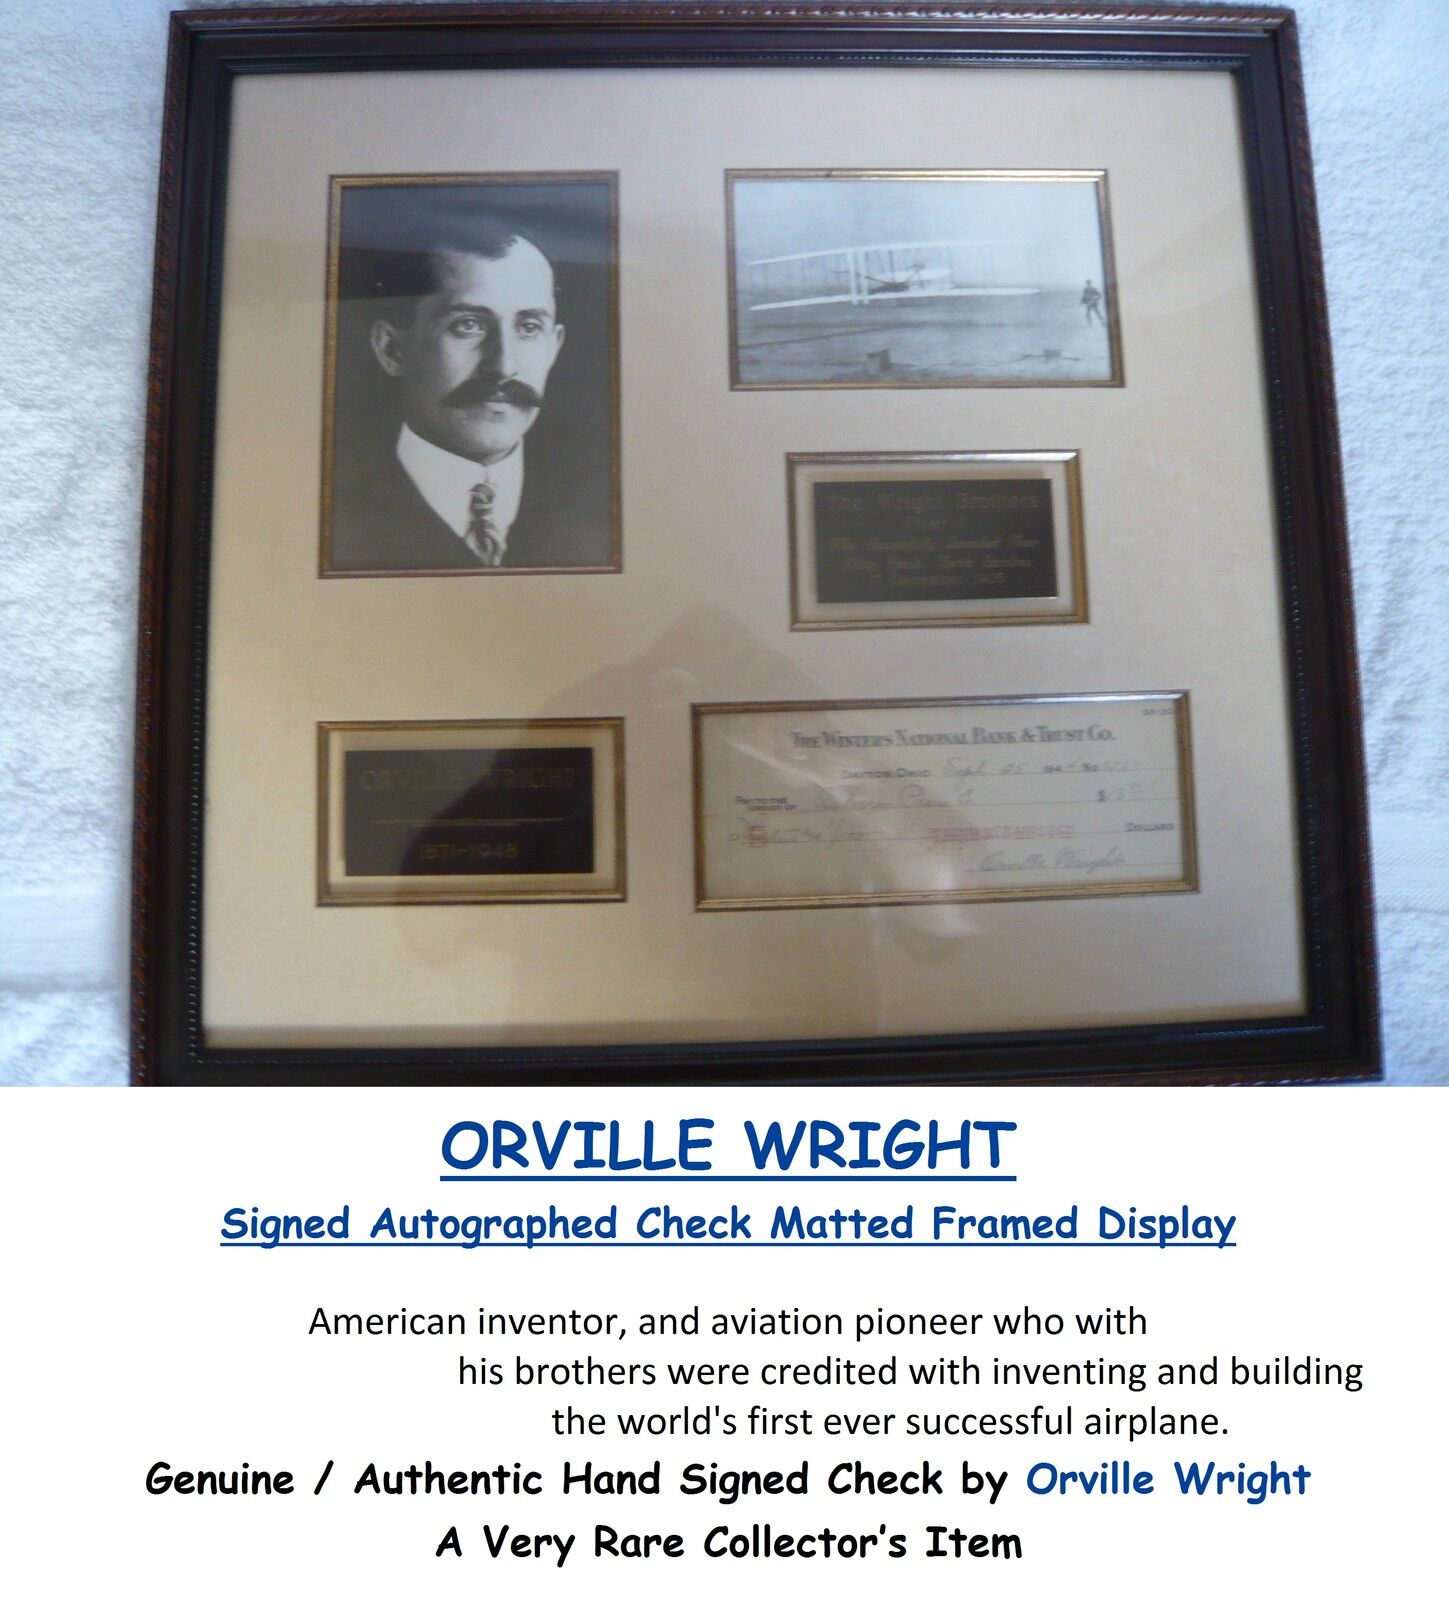 ORVILLE WRIGHT BROTHERS  SIGNED CANCELLED BANK CHEQUE  FRAMED DISPLAY  RARE ITEM